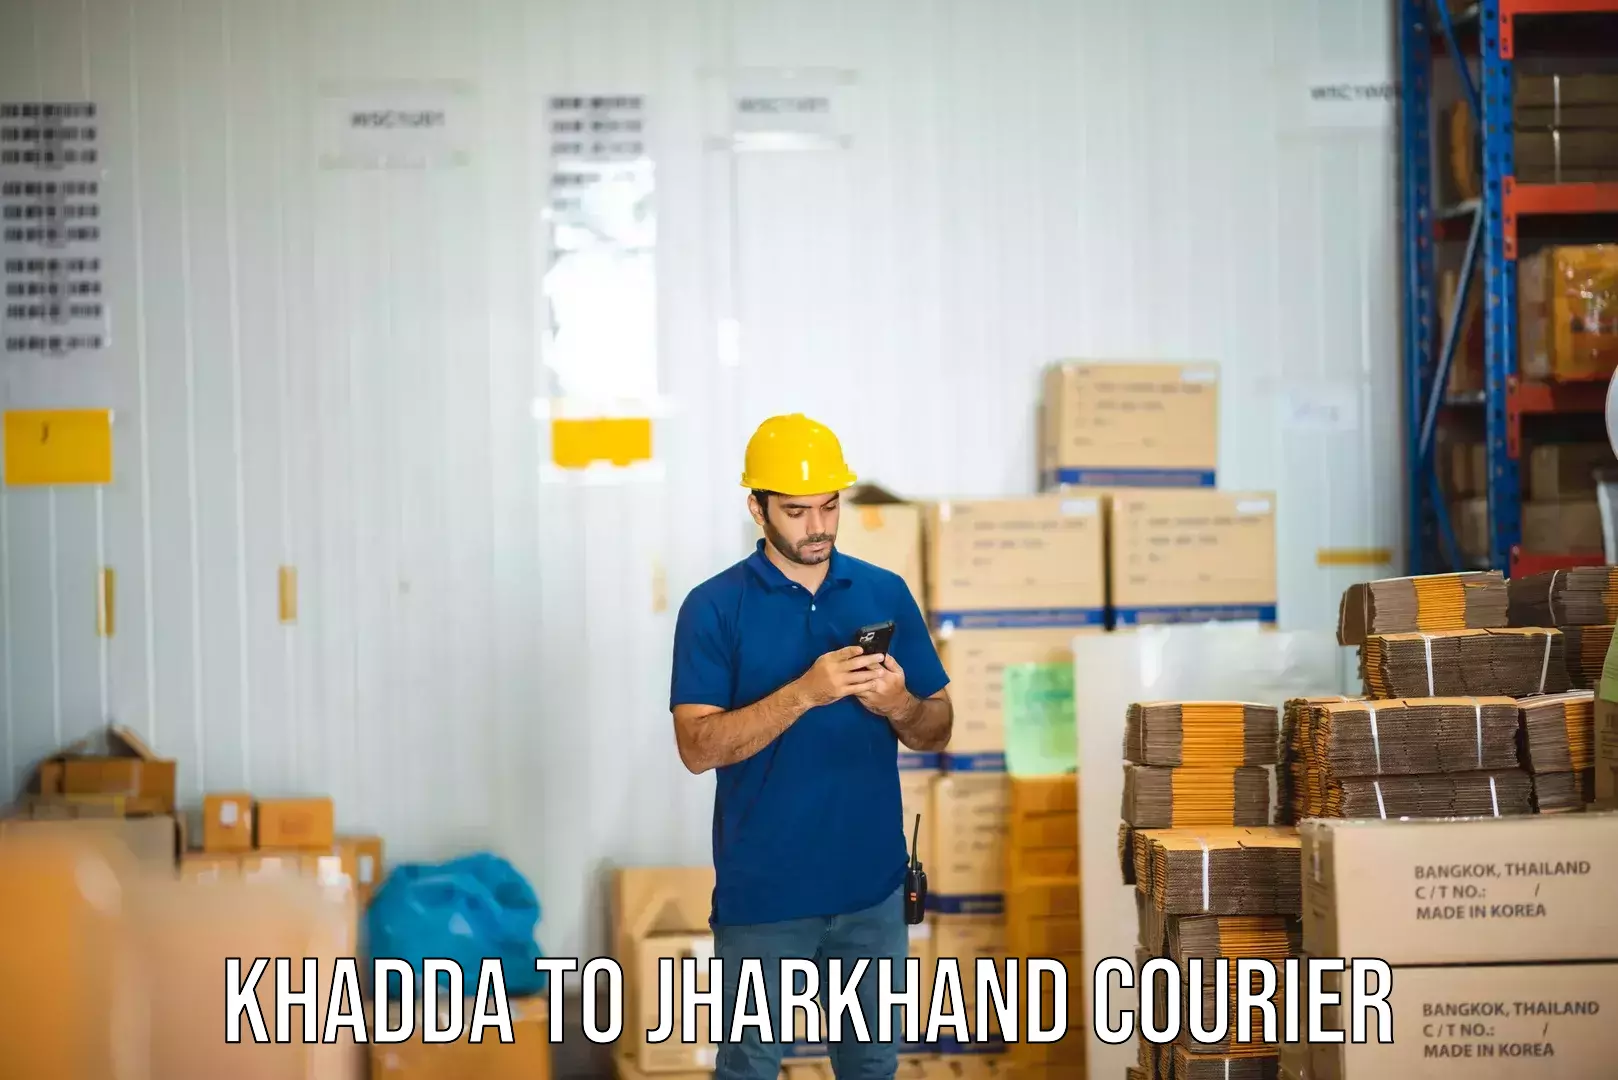 Sustainable delivery practices in Khadda to Jharkhand